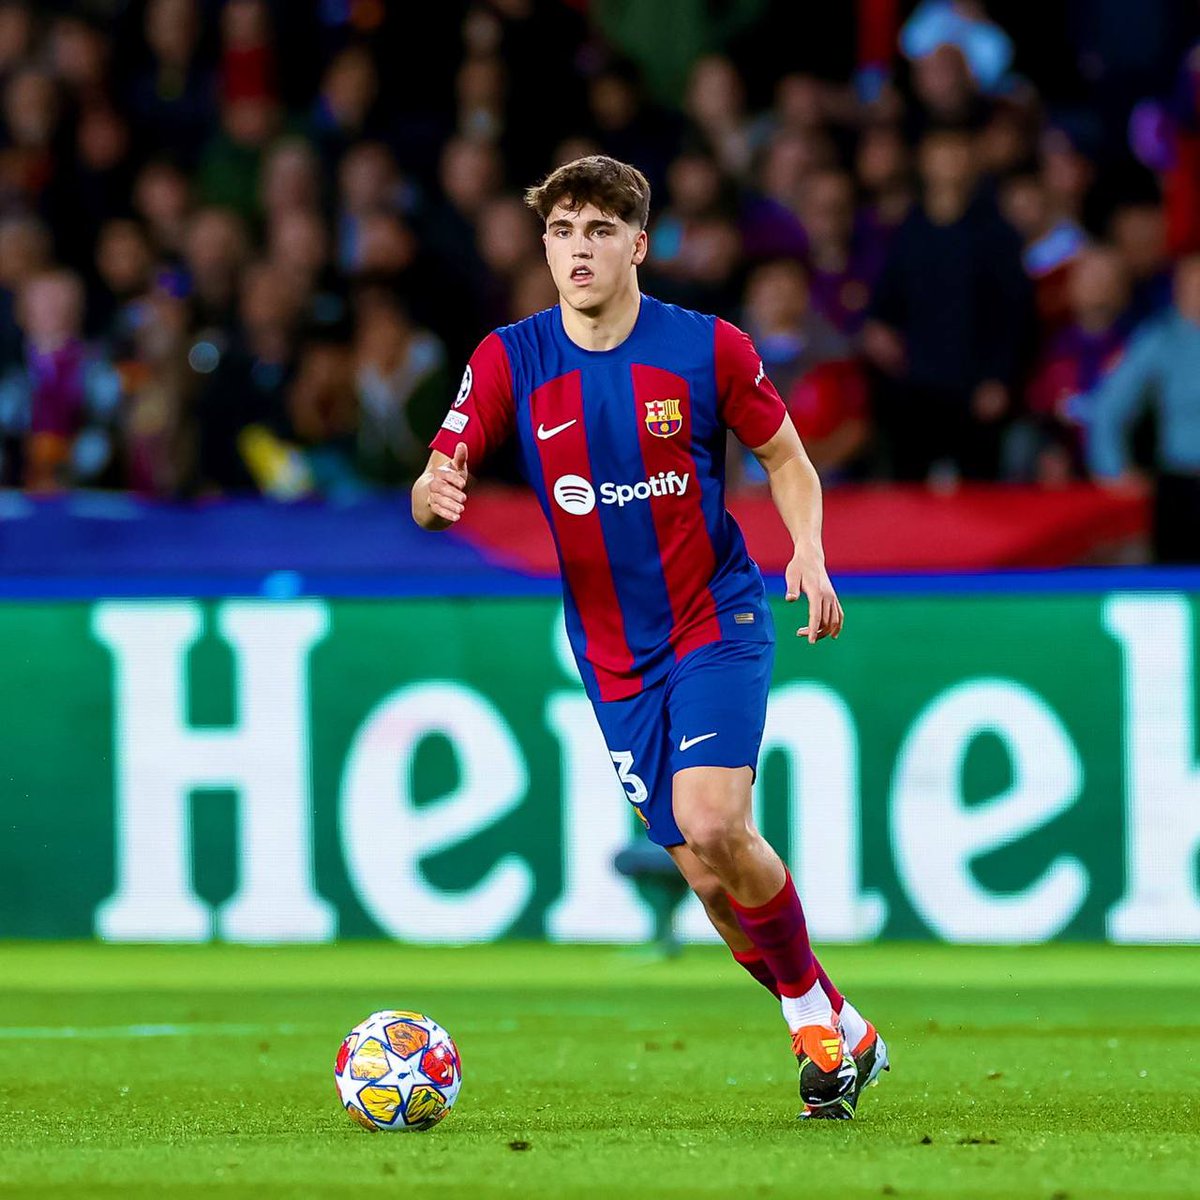 🚨 Barcelona have sent a contract extension offer to Pau Cubarsi with a salary increase! ✍️

A clause of €1 billion is planned for the 17-year-old defender. 🤑

(Source: Fabrizio Romano)
#footballtransfer #footballnews